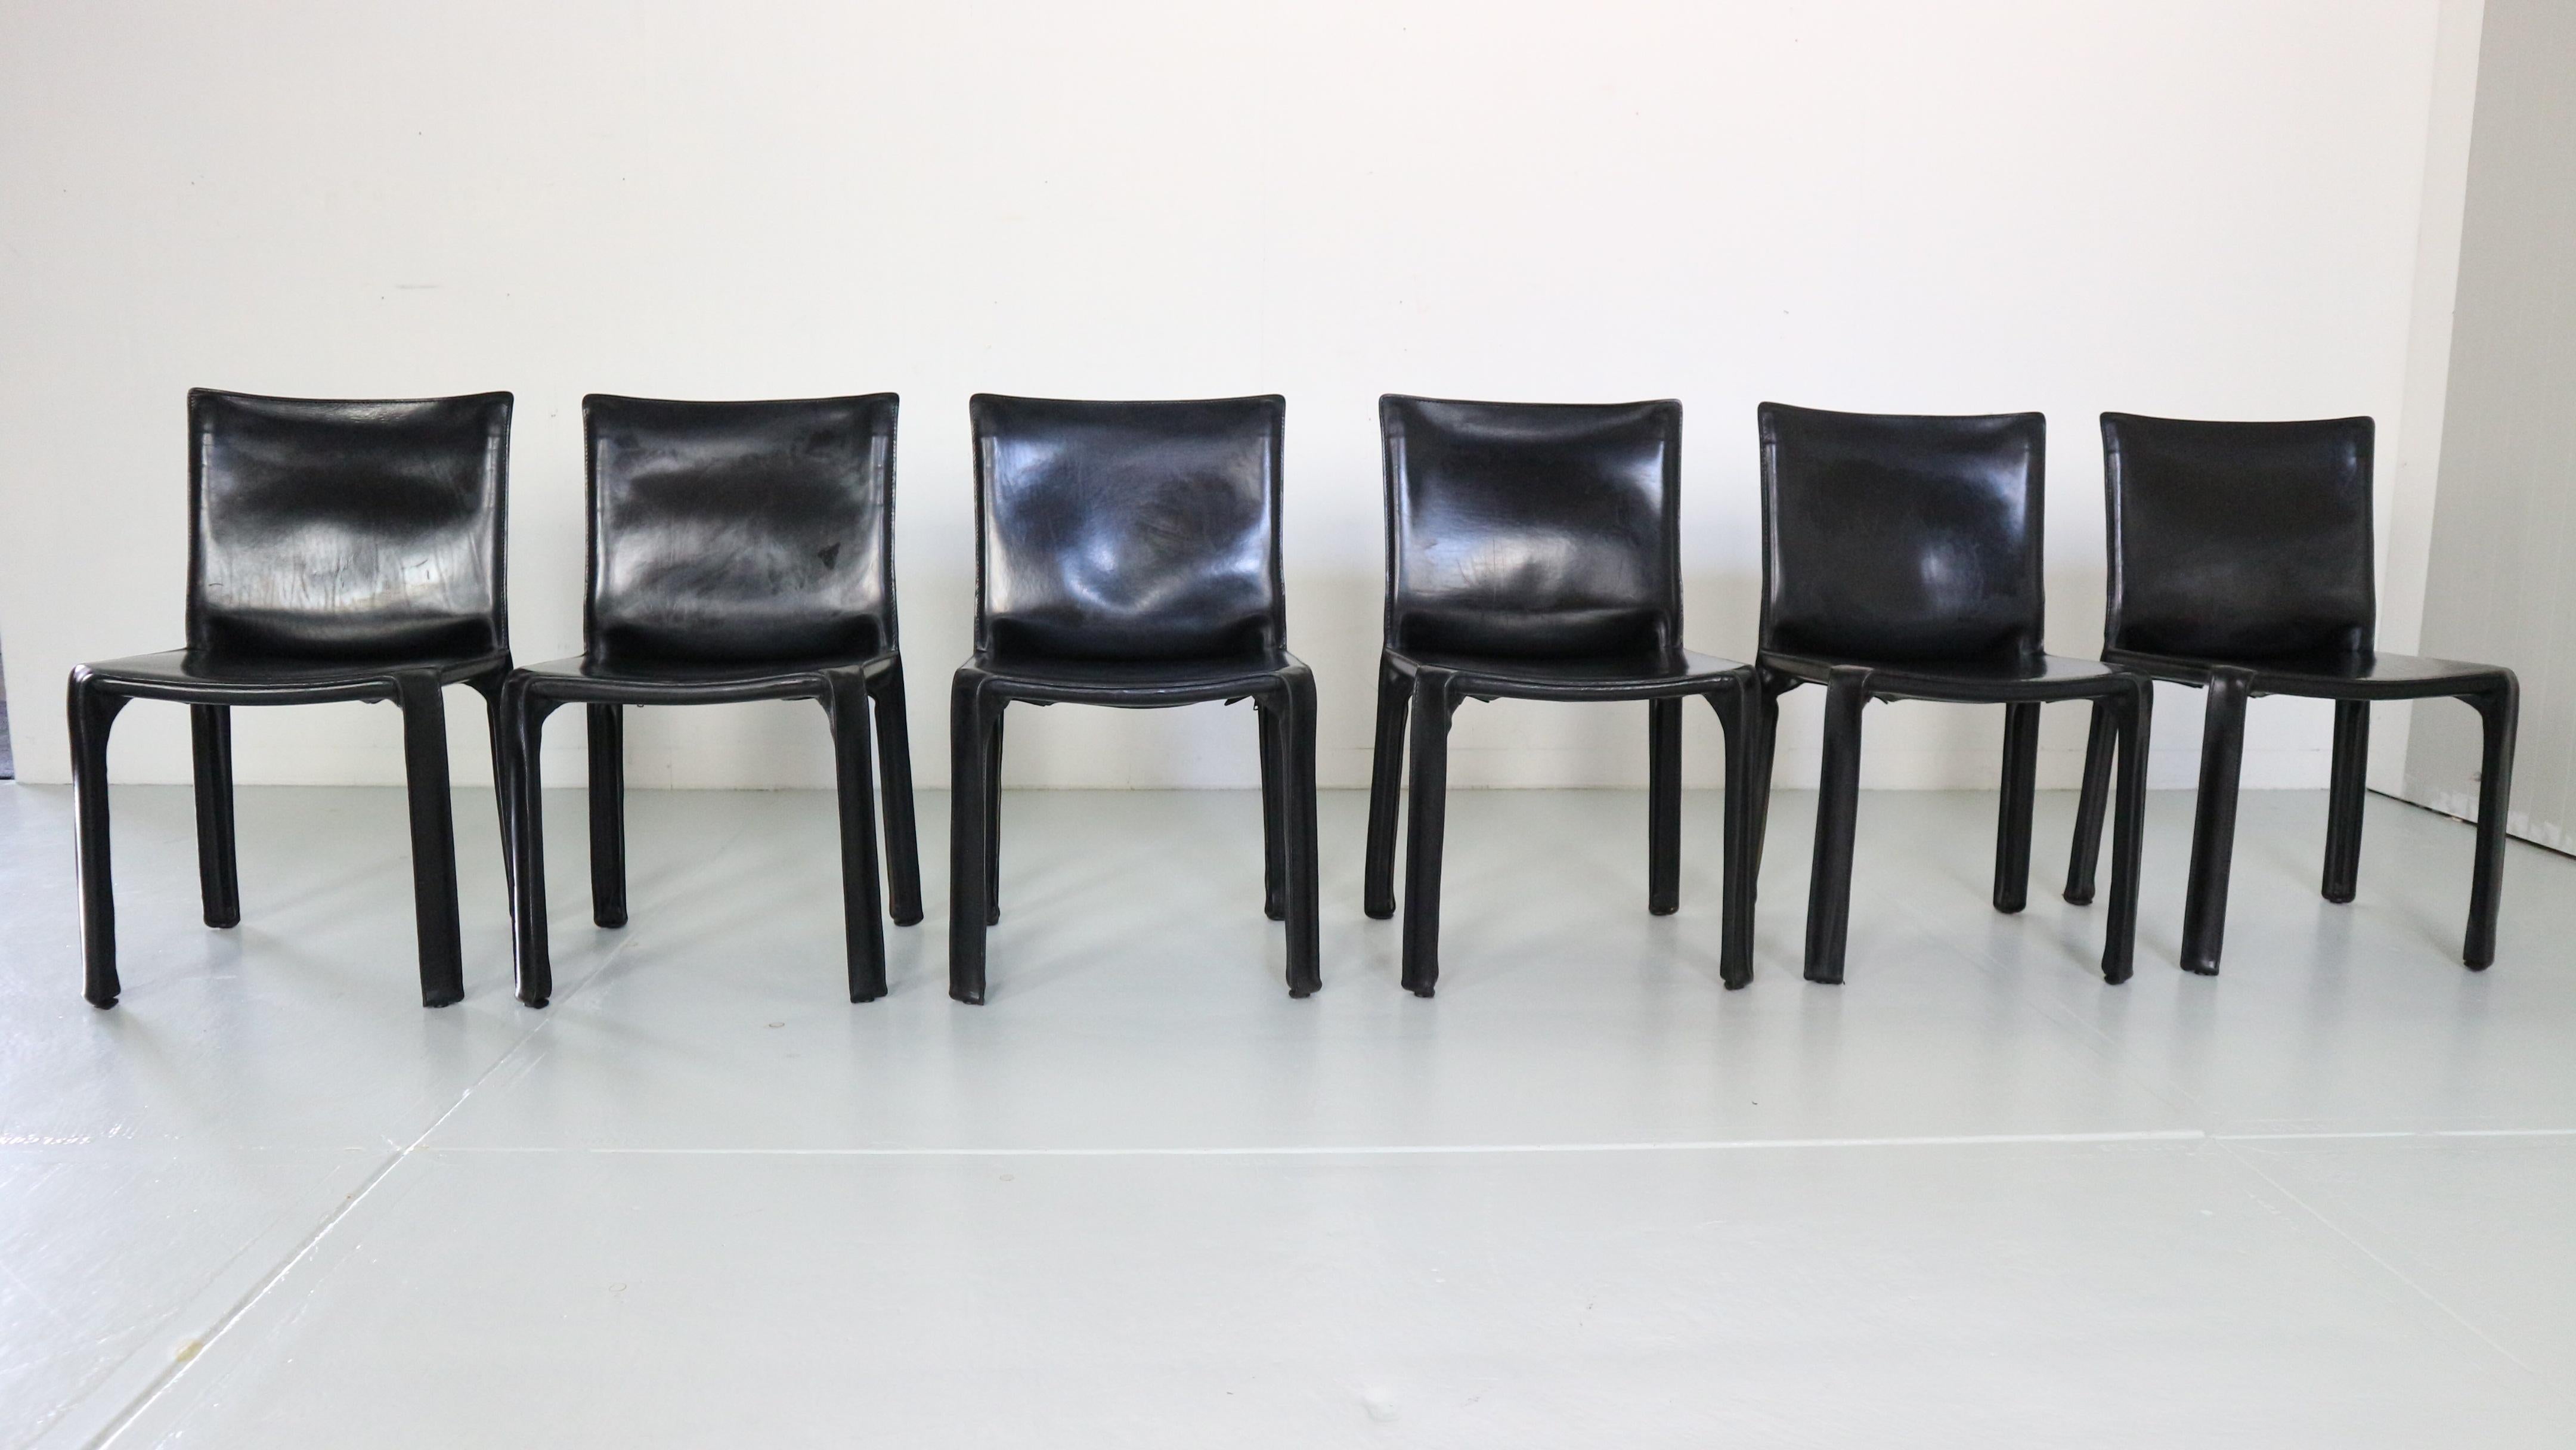 Set of 6 dining room chairs designed by Mario Bellini and manufactured by high quality design furniture maker- Cassina in 1970s period, Italy.

Model- Cab 412. All chairs are marked and in a very good vintage condition.

Cab chairs consists of a